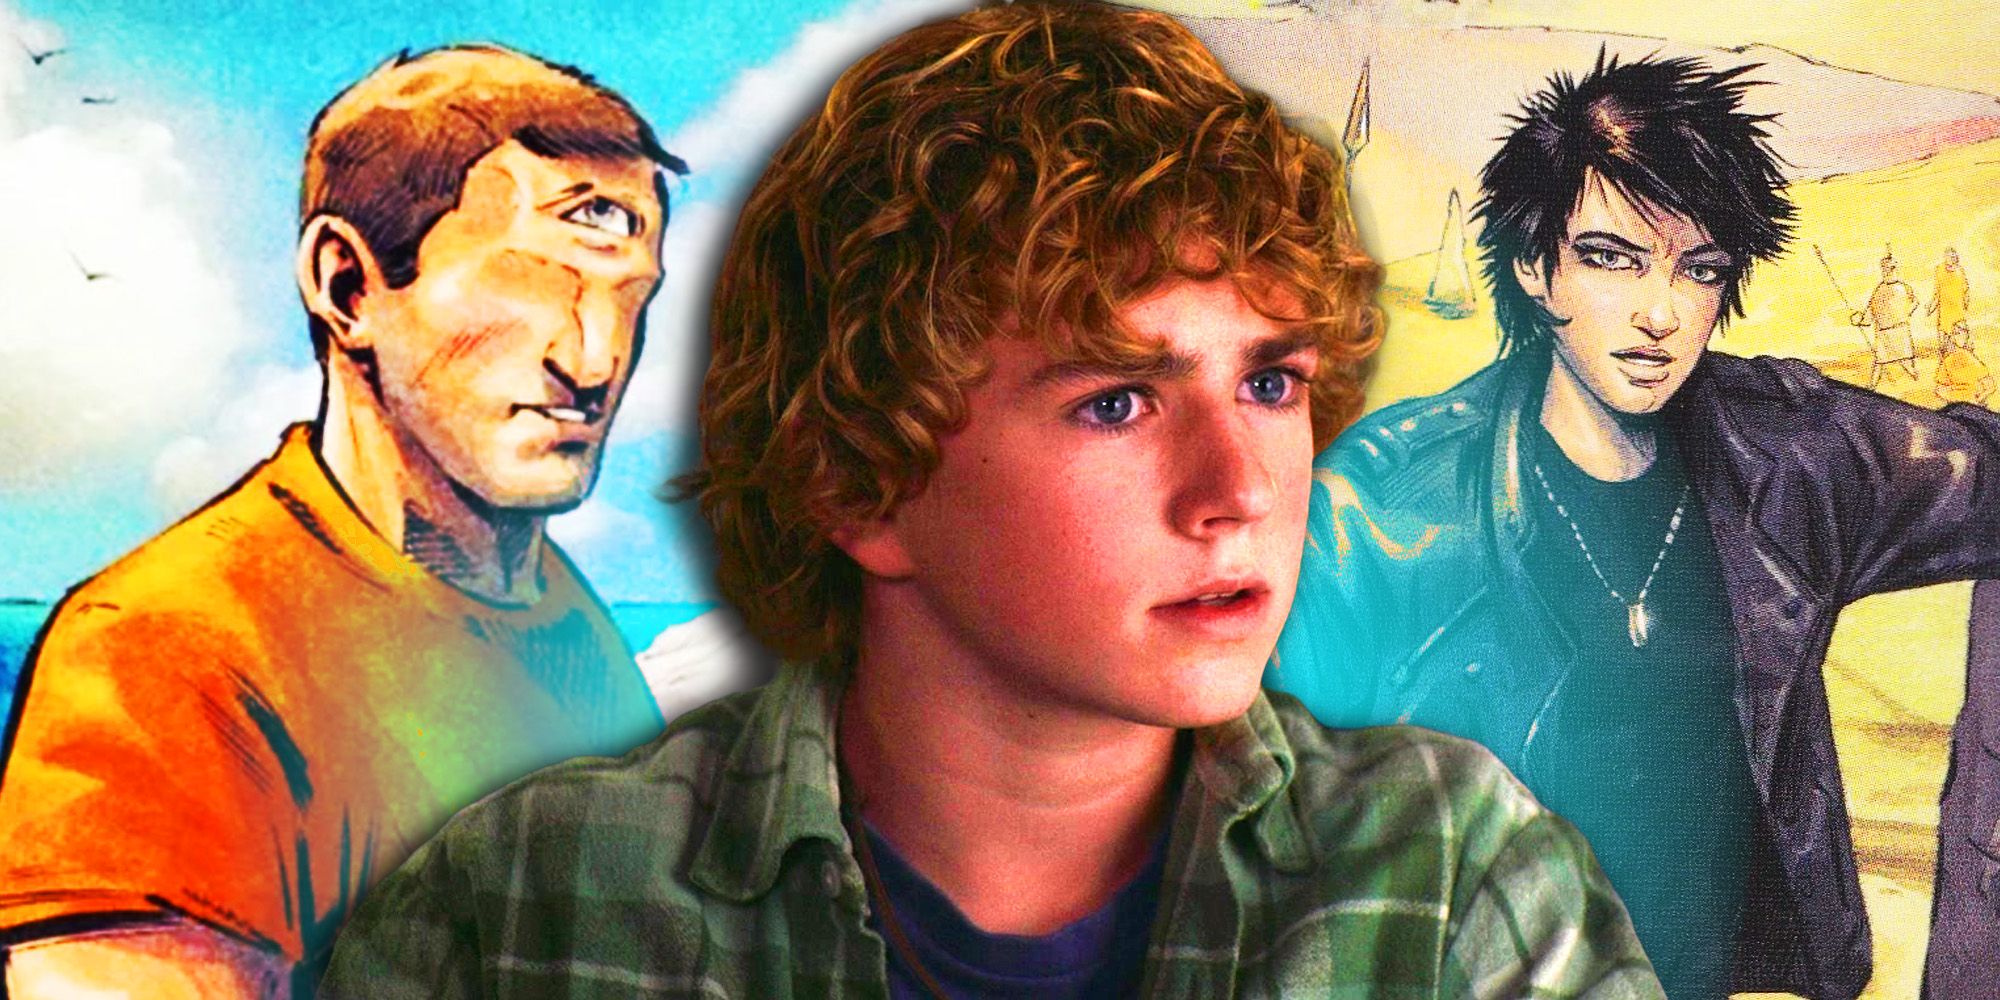 An image of Walker Scobell as Percy Jackson in front of images of Tyson and Thalia from the graphic novels